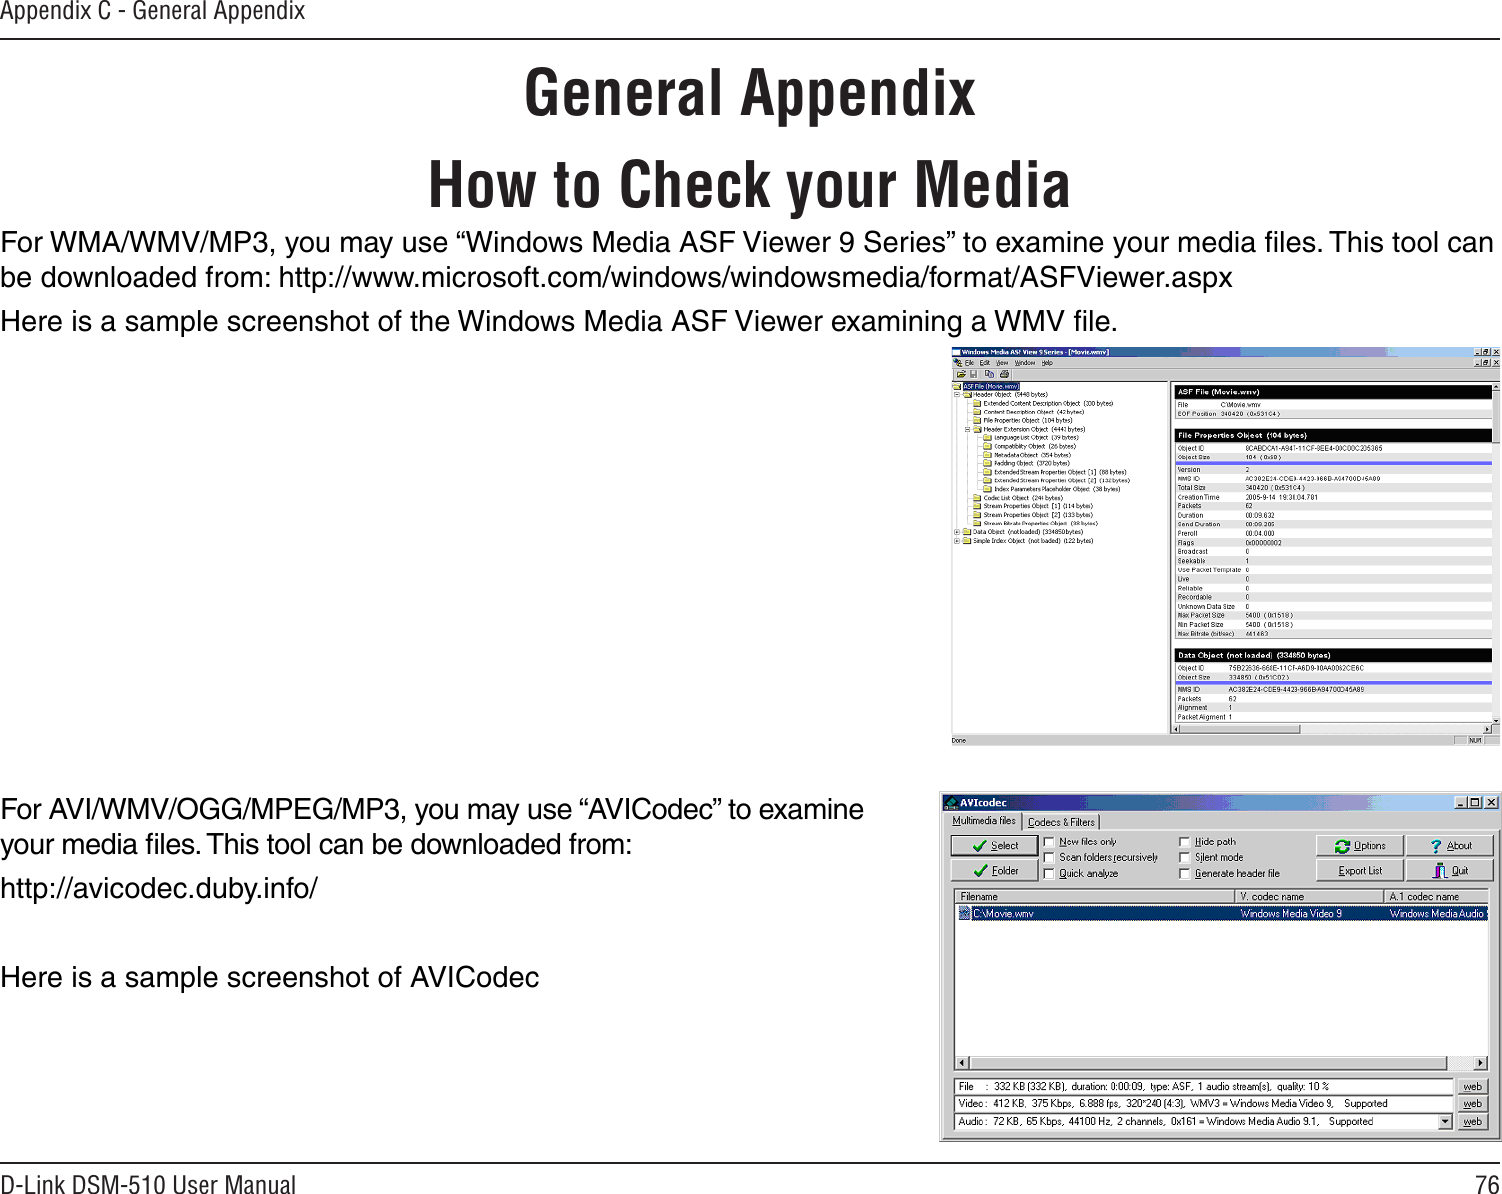 76D-Link DSM-510 User ManualAppendix C - General AppendixHow to Check your MediaFor WMA/WMV/MP3, you may use “Windows Media ASF Viewer 9 Series” to examine your media ﬁles. This tool can be downloaded from: http://www.microsoft.com/windows/windowsmedia/format/ASFViewer.aspxHere is a sample screenshot of the Windows Media ASF Viewer examining a WMV ﬁle.For AVI/WMV/OGG/MPEG/MP3, you may use “AVICodec” to examine your media ﬁles. This tool can be downloaded from:http://avicodec.duby.info/Here is a sample screenshot of AVICodec  General Appendix